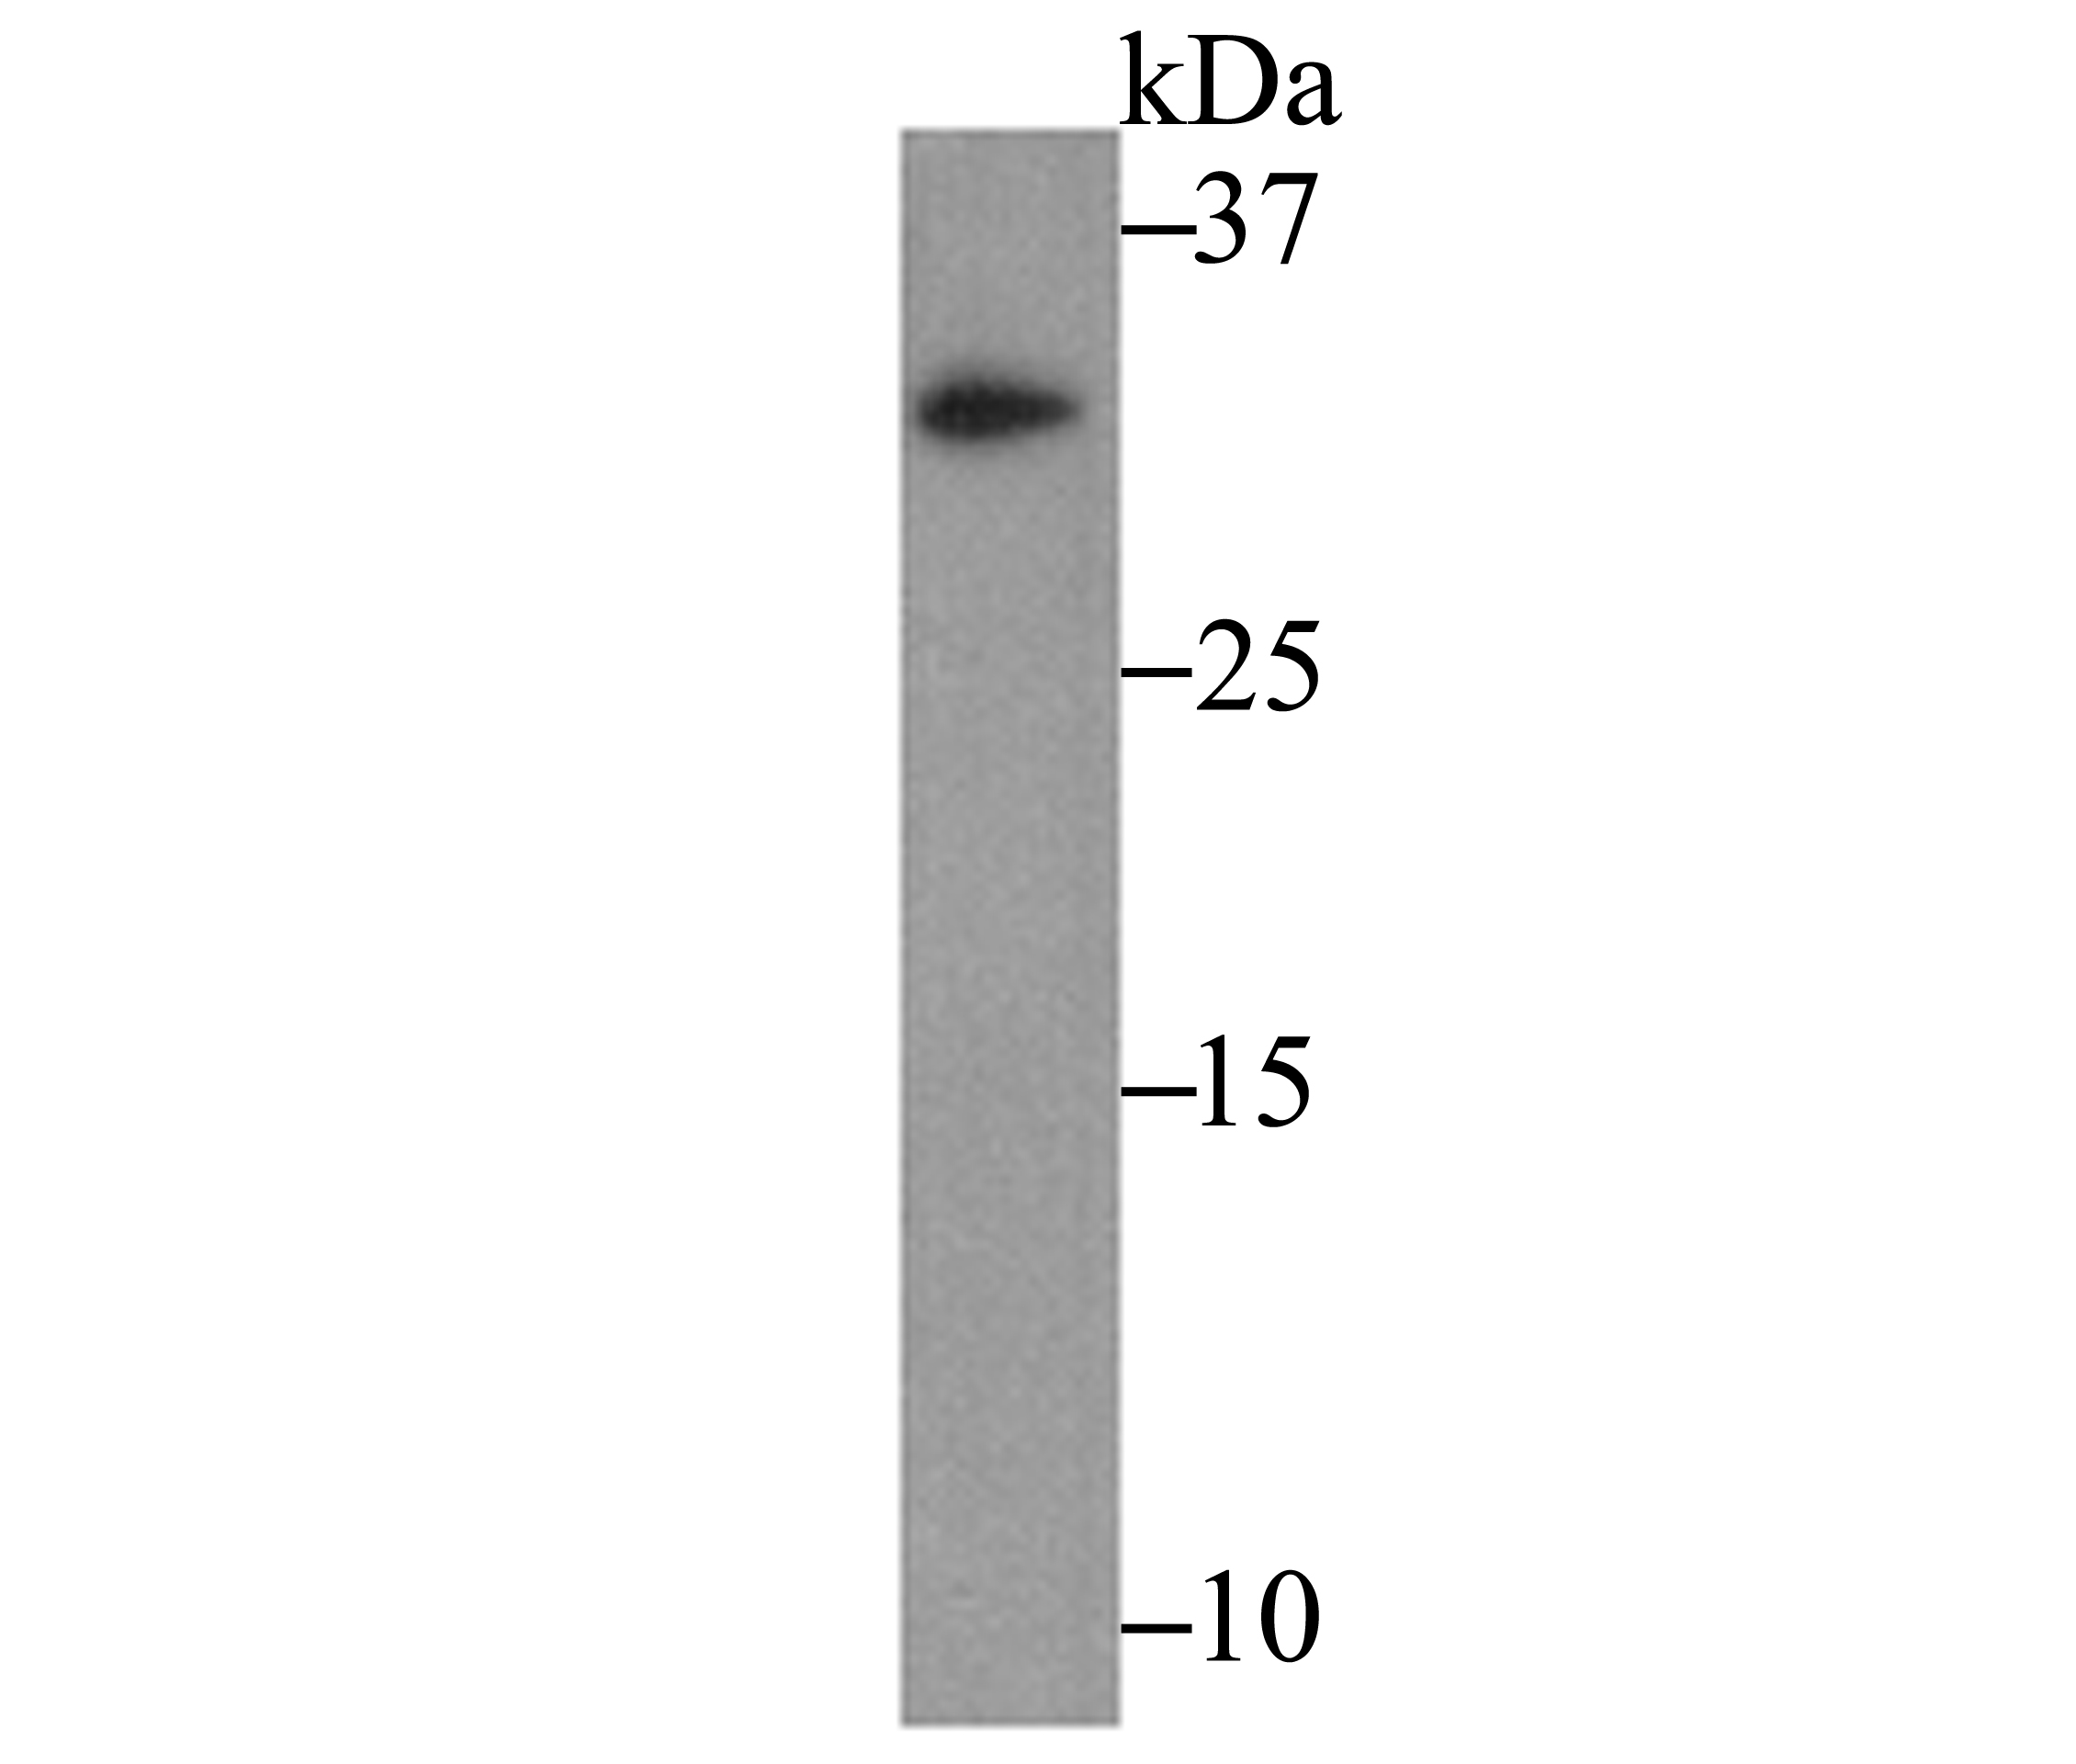 Western blot analysis of IL-31 on recombinant protein lysate using anti-IL-31 antibody at 1/500 dilution.